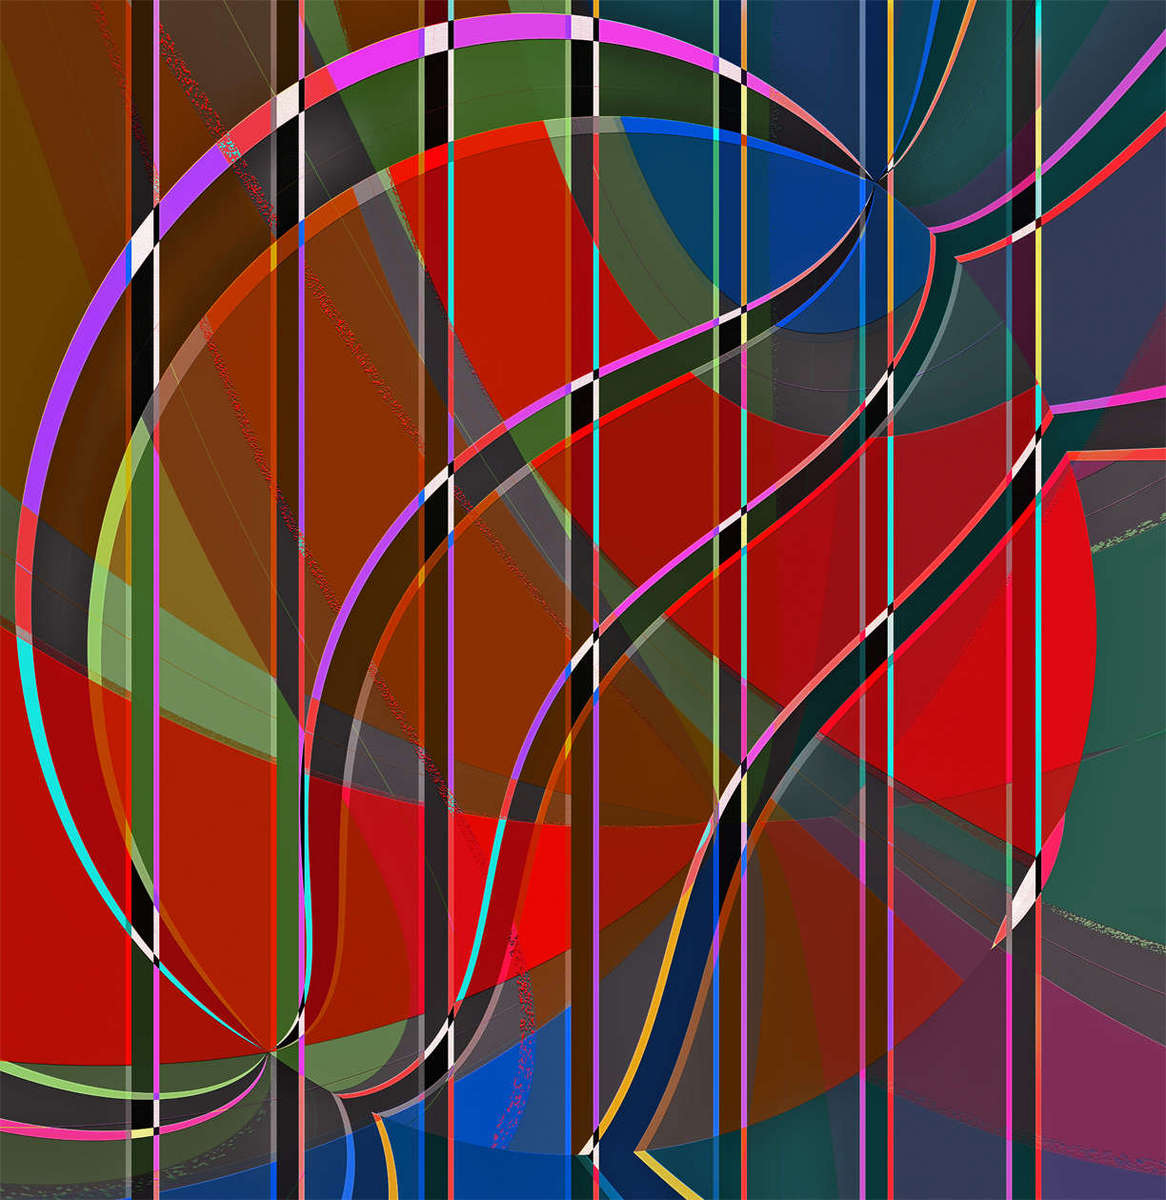 Can_A_Circle_Be_Caged.jpg : Section 3 : American artist digital invention archival artifact color print image emerging capture creative convergent transparency universe dream history painter Hybrid exhibition